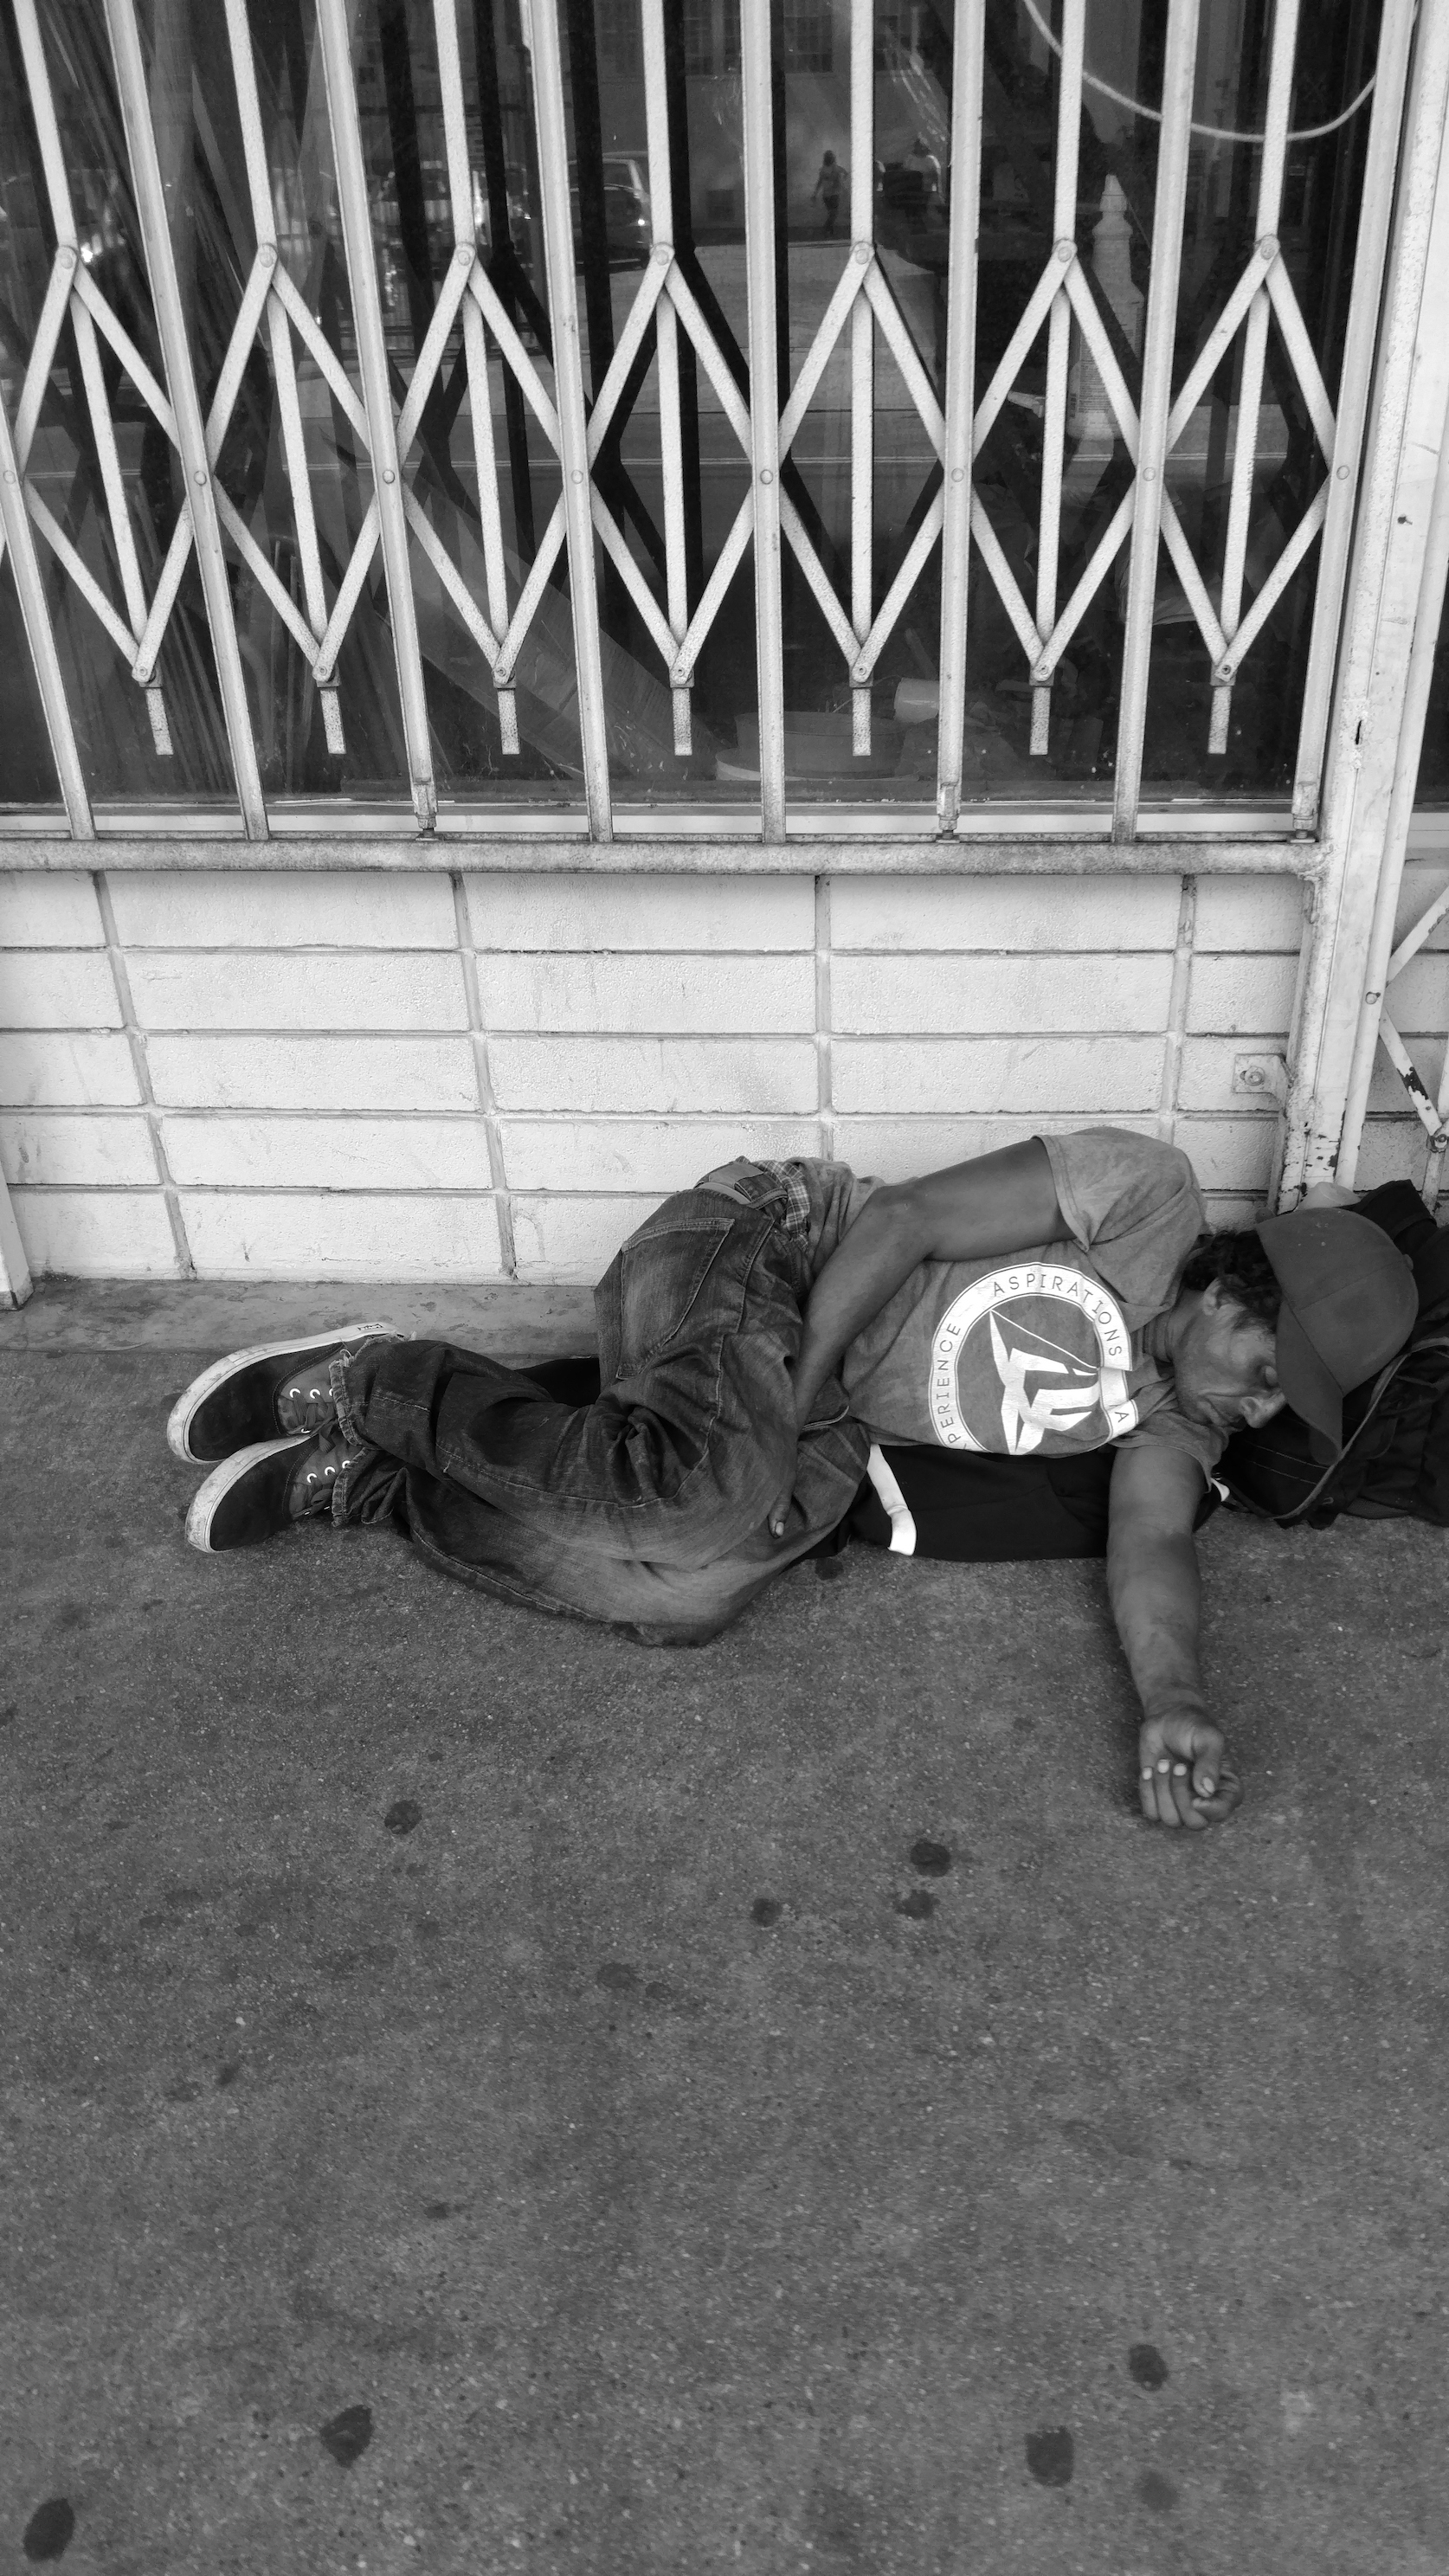 A Homeless Person in Skid Row